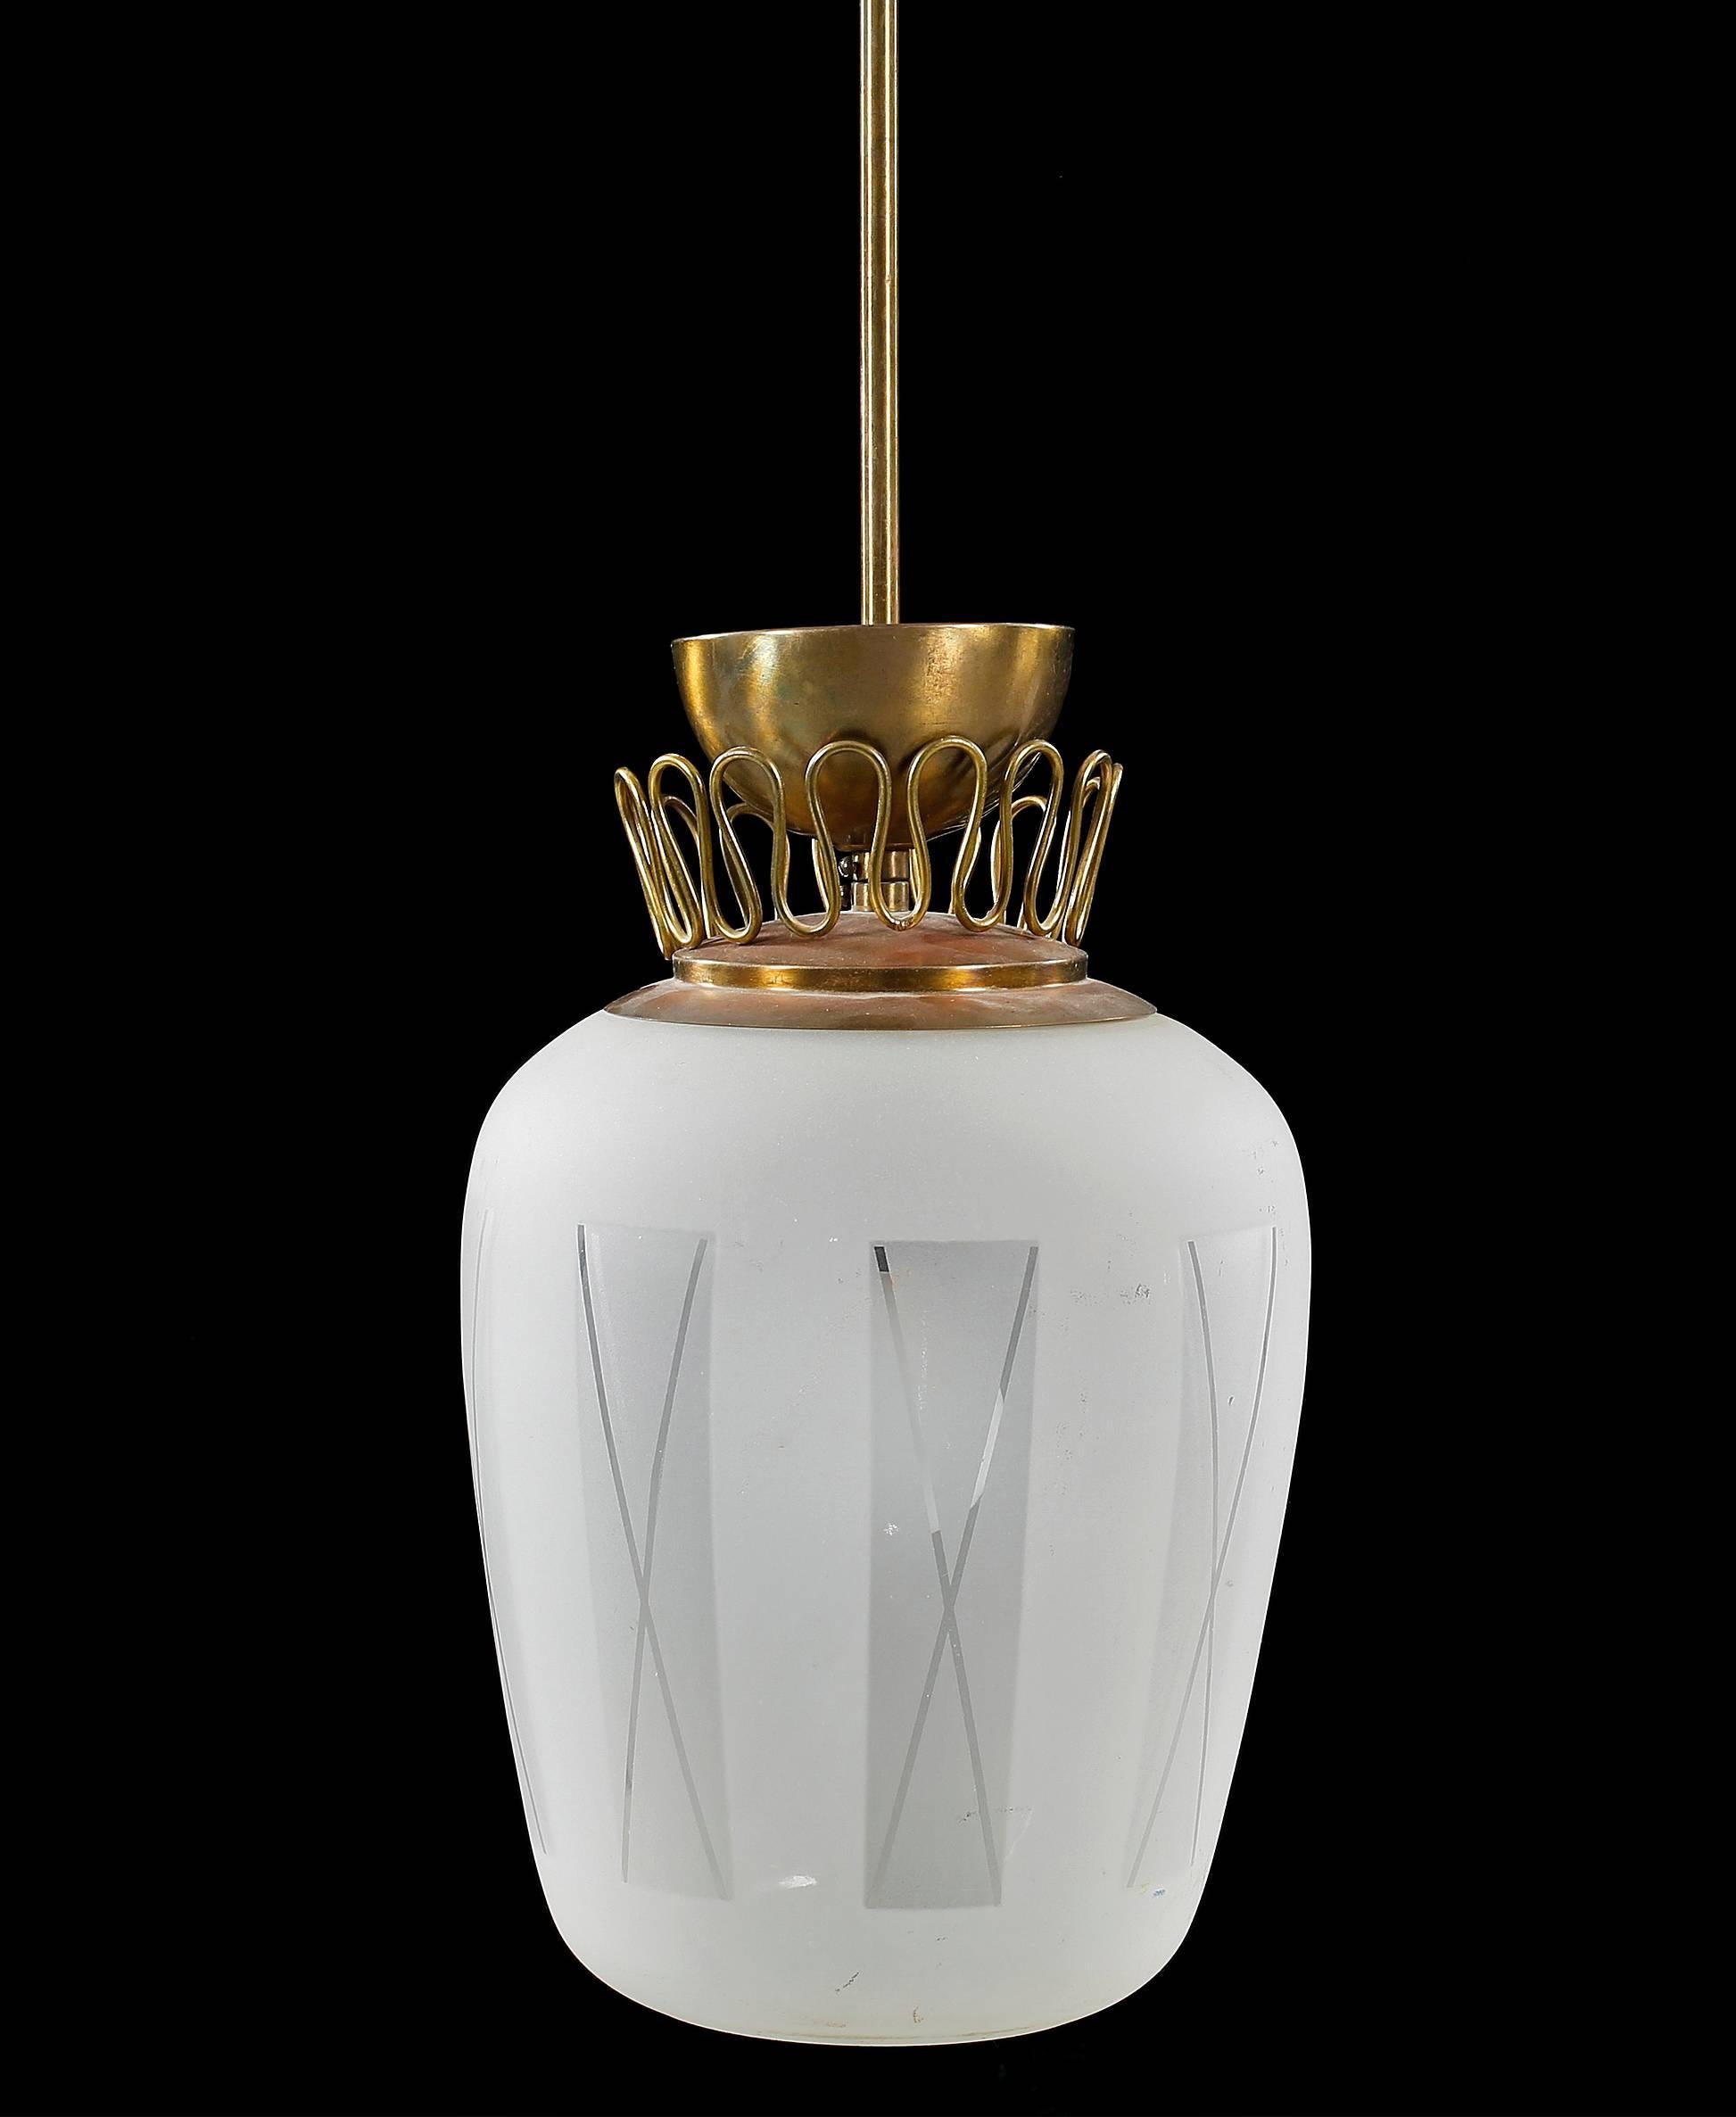 Swedish pendant, circa 1940.
Etched glass with brass decoration.
Existing wiring, rewiring available upon request.
2 fixtures available, price is for each.